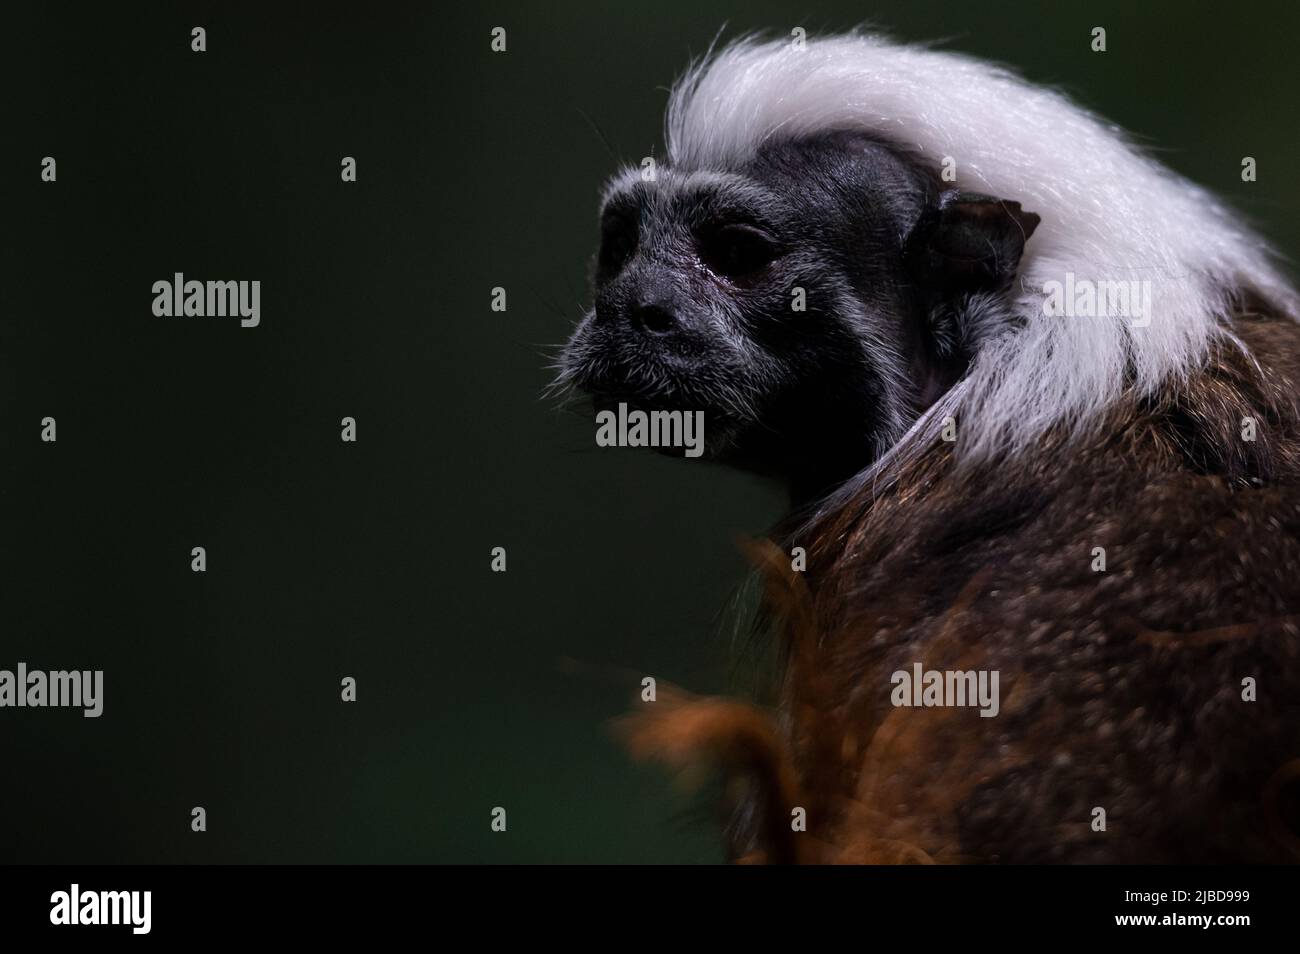 A cotton-top tamarin (Saguinus oedipus), one of the smallest primates, pictured in its enclosure at Faunia zoo. Stock Photo